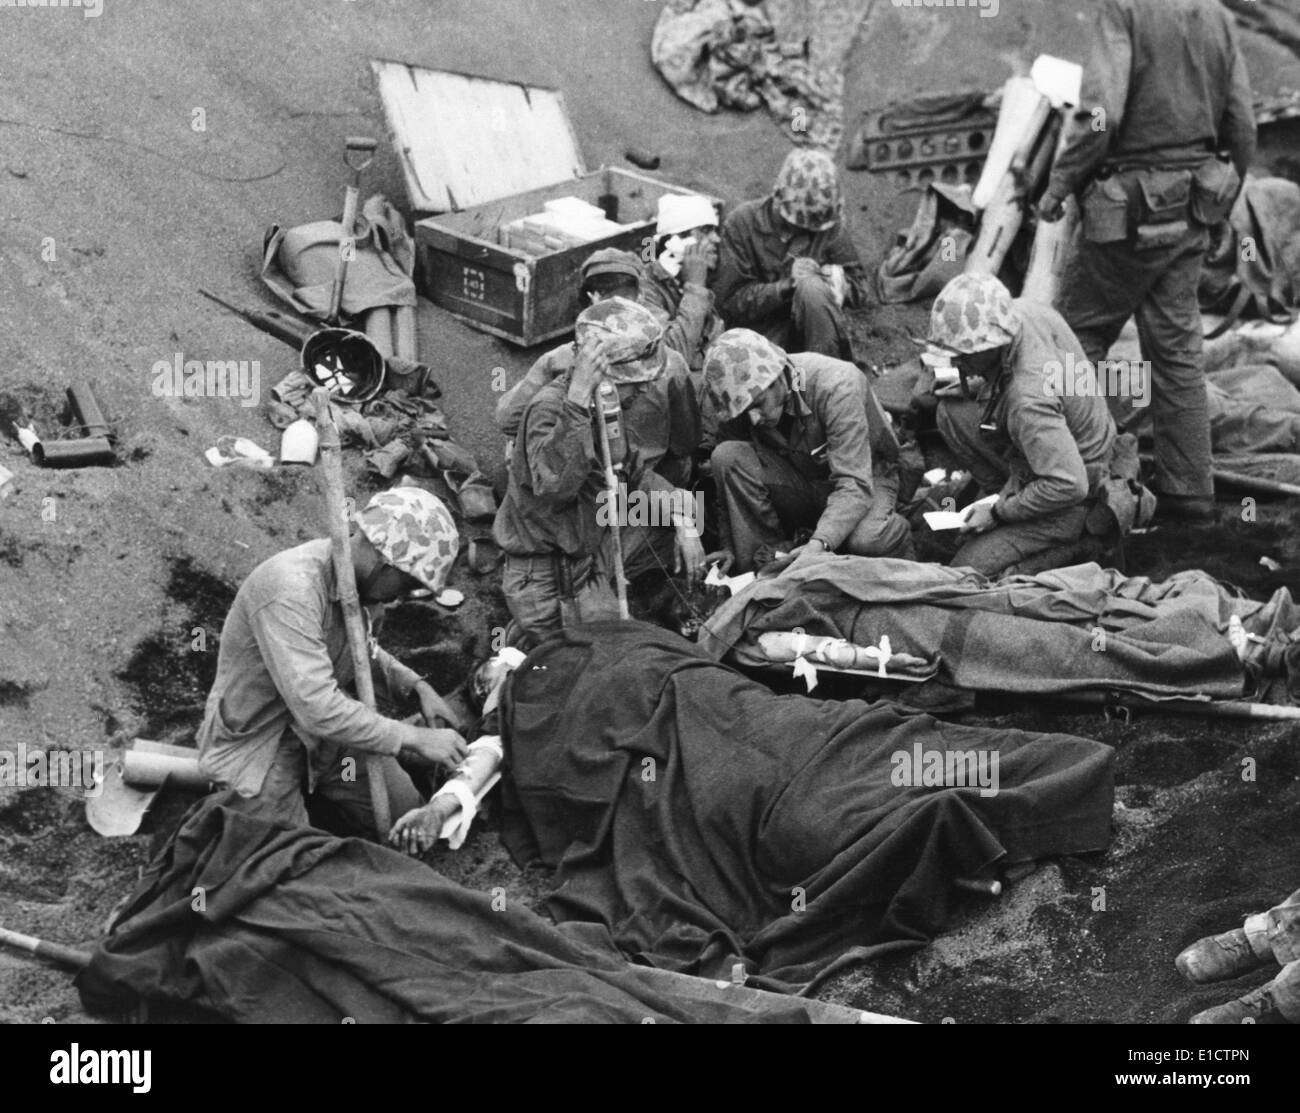 Navy doctors and corpsmen treat seriously wounded Marines on Iwo Jima. Feb. 19-March 26, 1945, during World War 2. Stock Photo